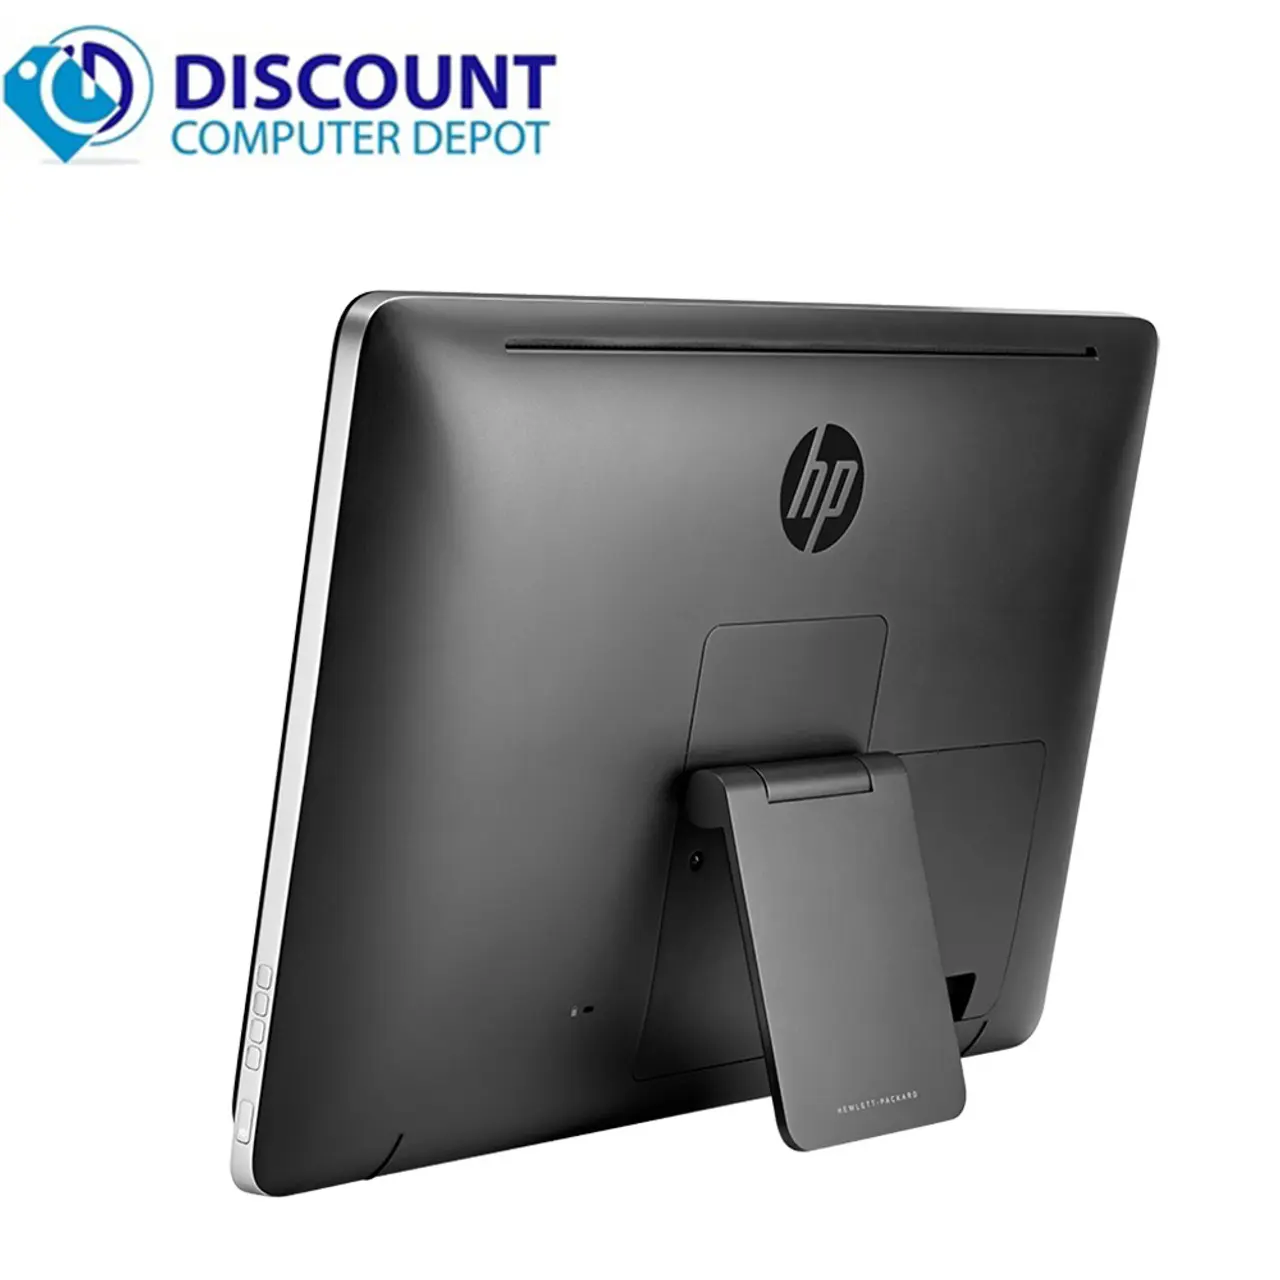 hewlett packard touchscreen monitor - Does the HP e24 G4 have a camera